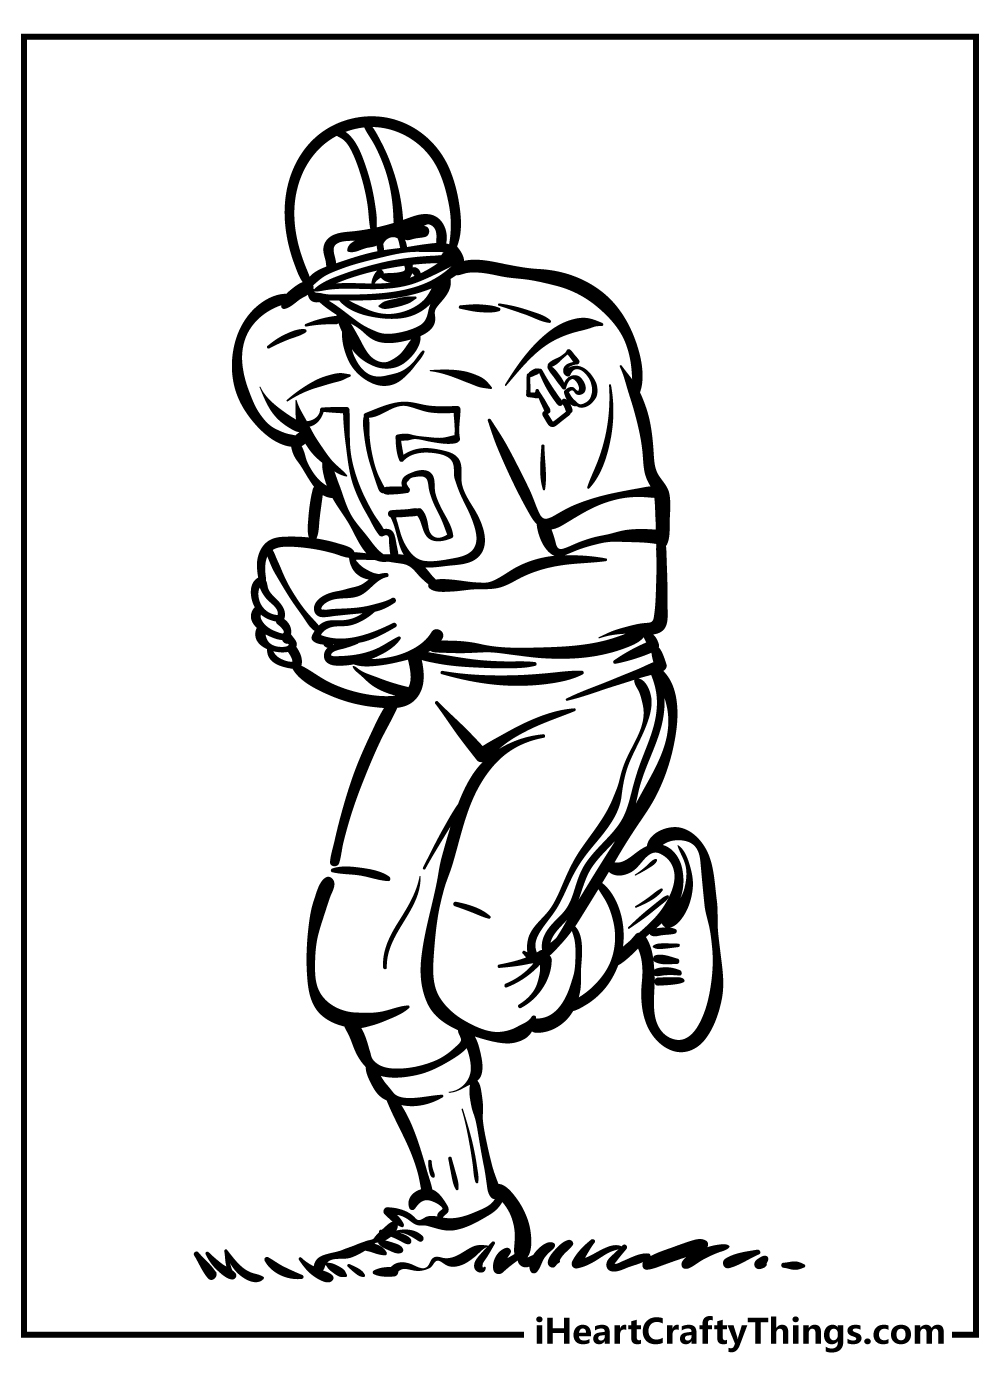 Football Coloring Book for adults free download